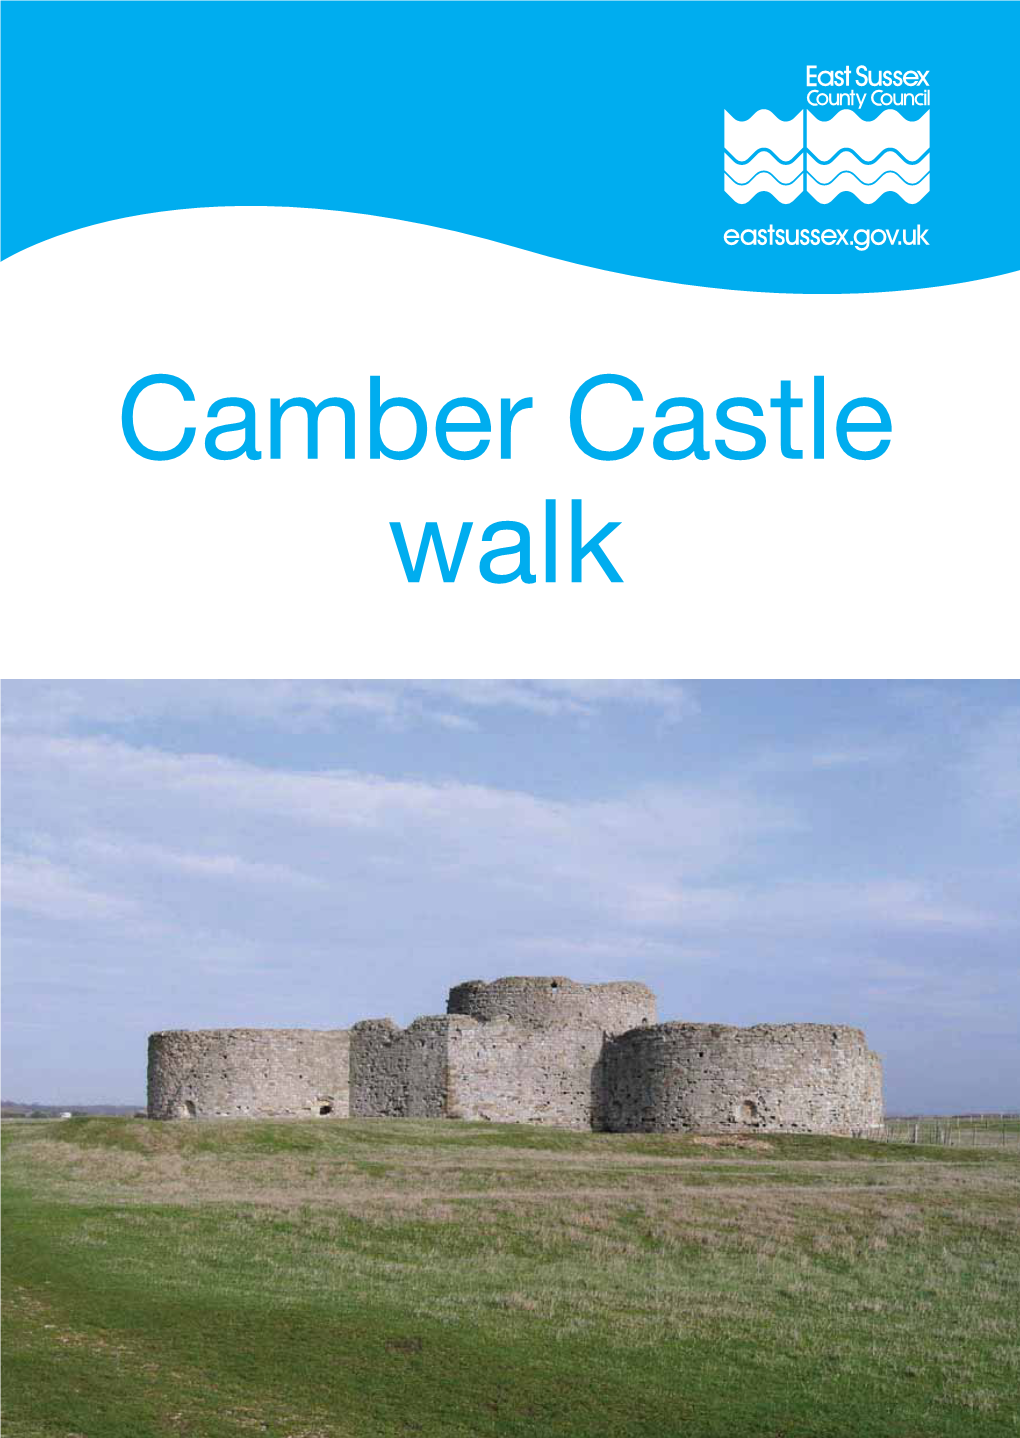 Camber Castle Walk Information About Camber Castle Rye Harbour Nature Reserve